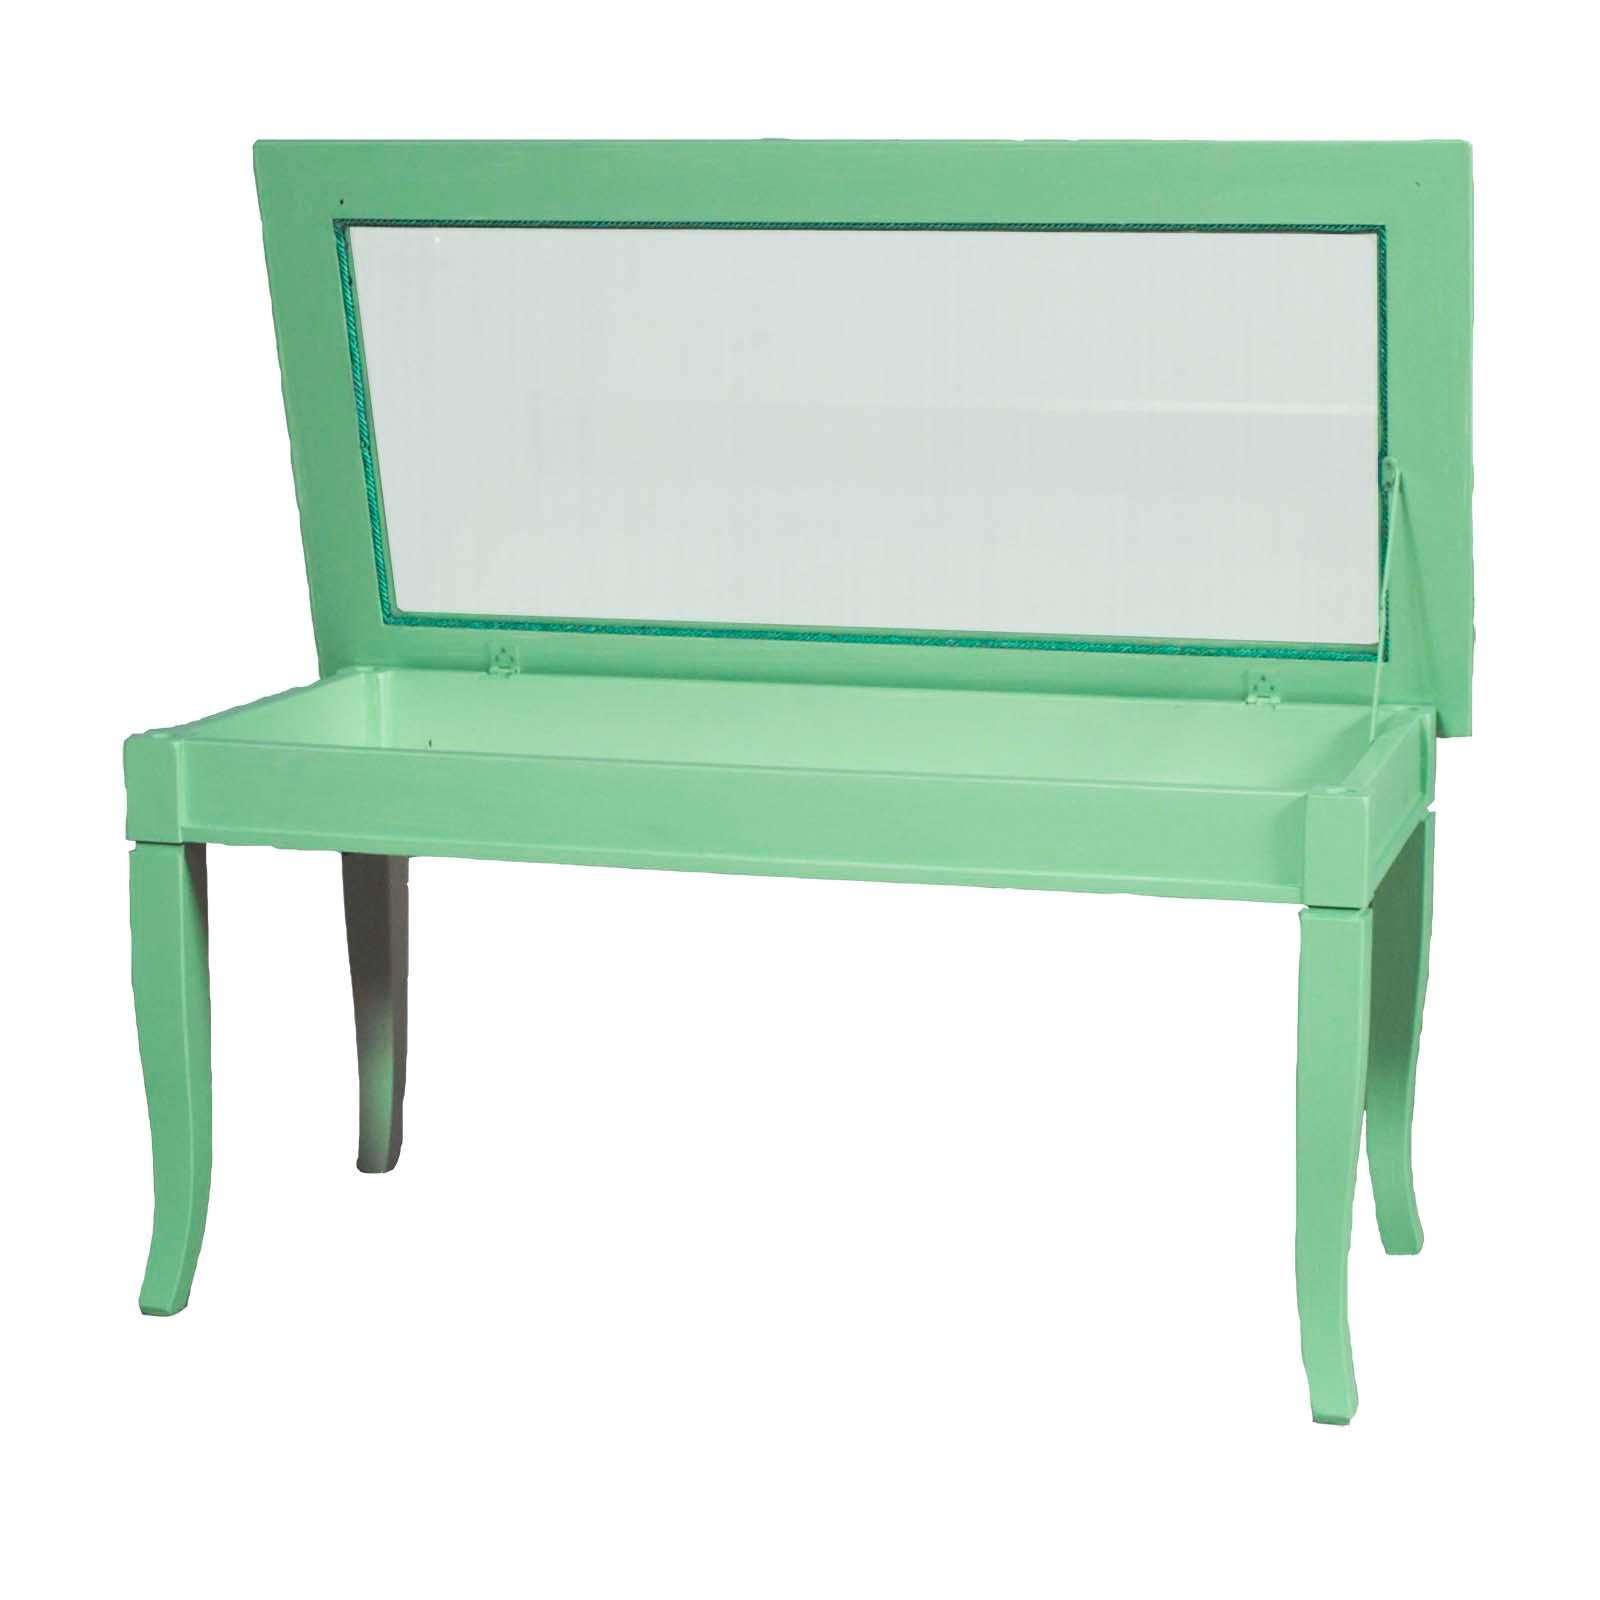 1970s exhibition vitrine cabinet , coffee table, center table, in emerald green painted maple, with glass top, internally lined with fabric.